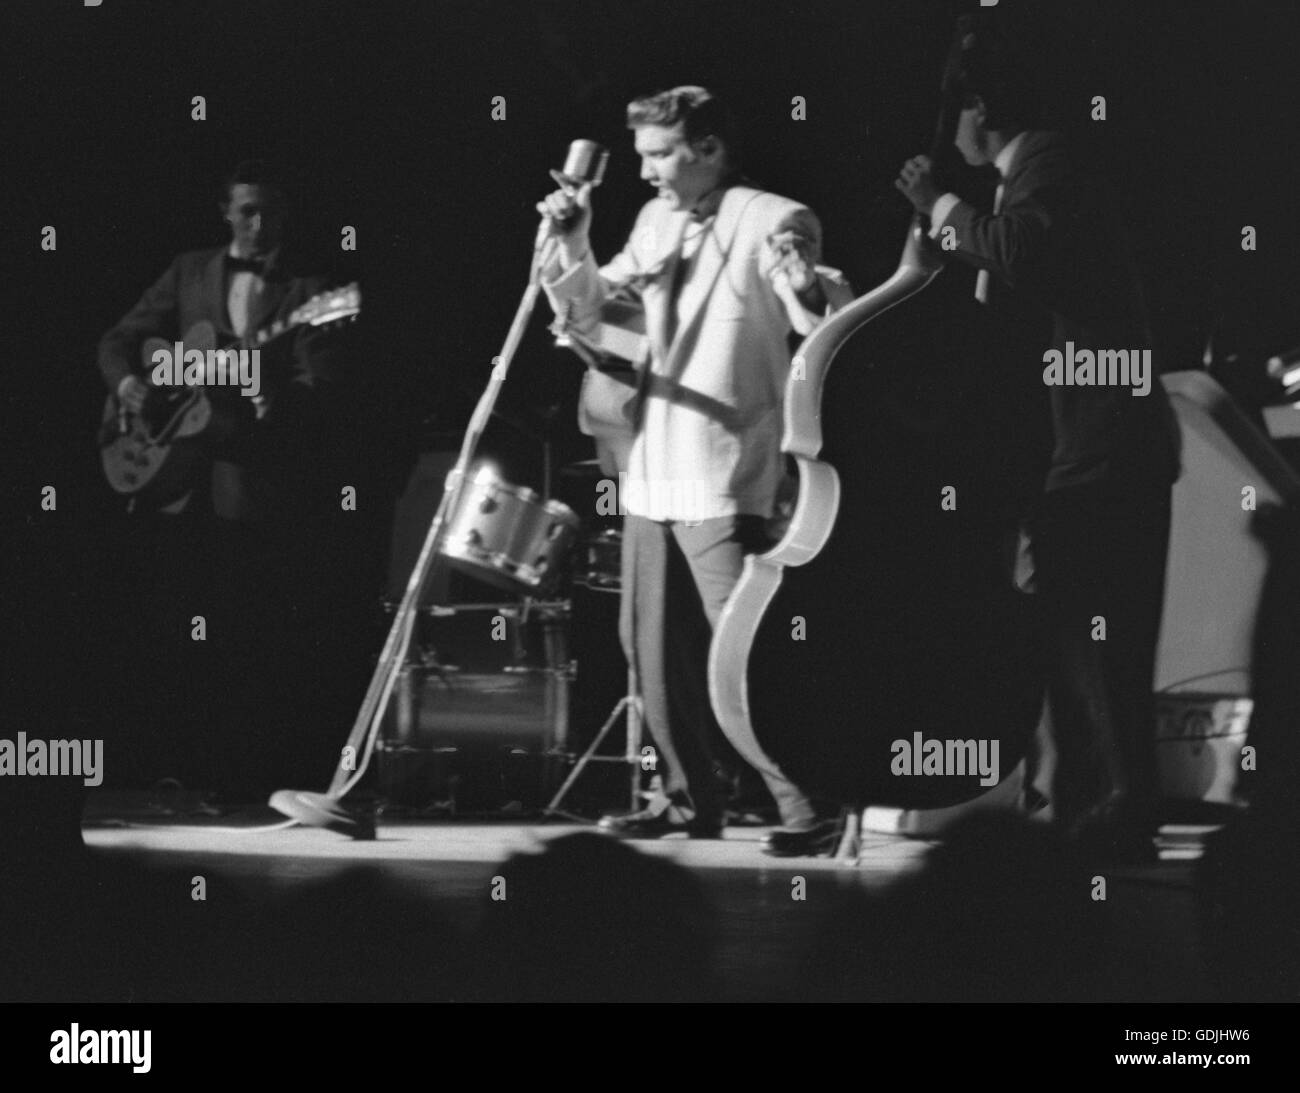 Elvis Presley in concert at the Fox Theater, Detroit, Michigan, May 25, 1956. Stock Photo